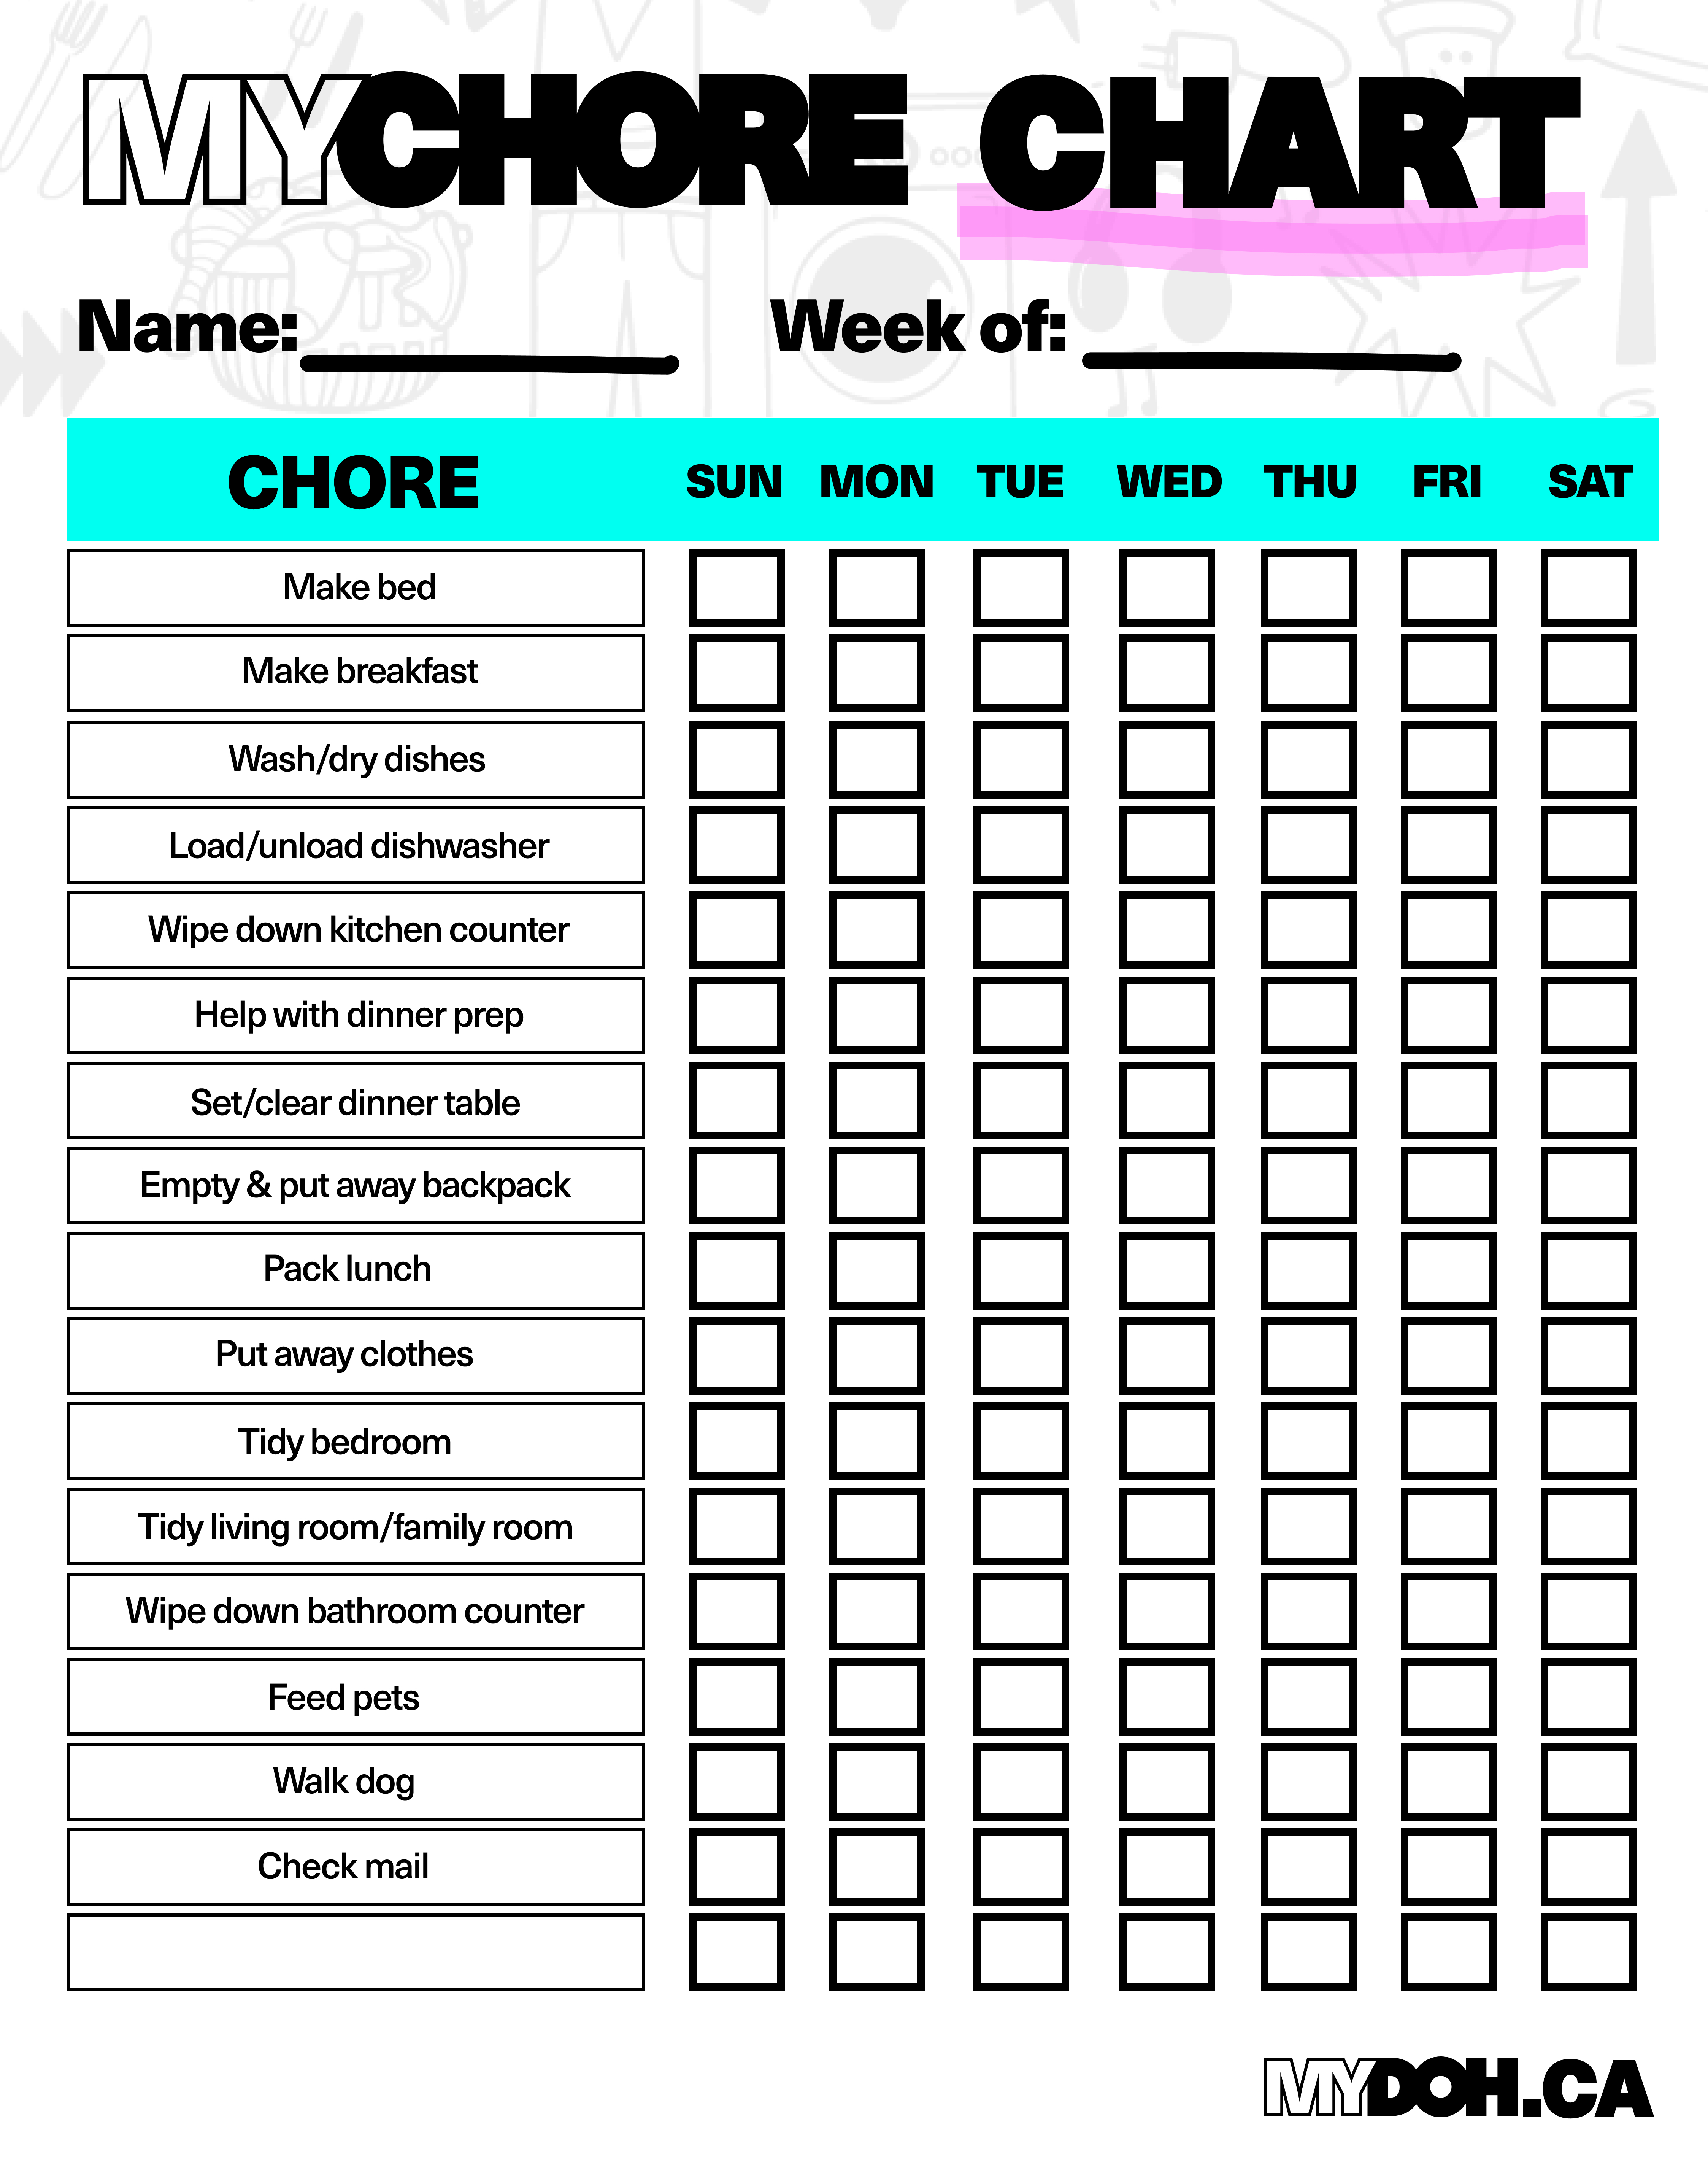 paper-party-kids-clip-art-image-files-weekly-chores-checklist-embellishments-etna-pe